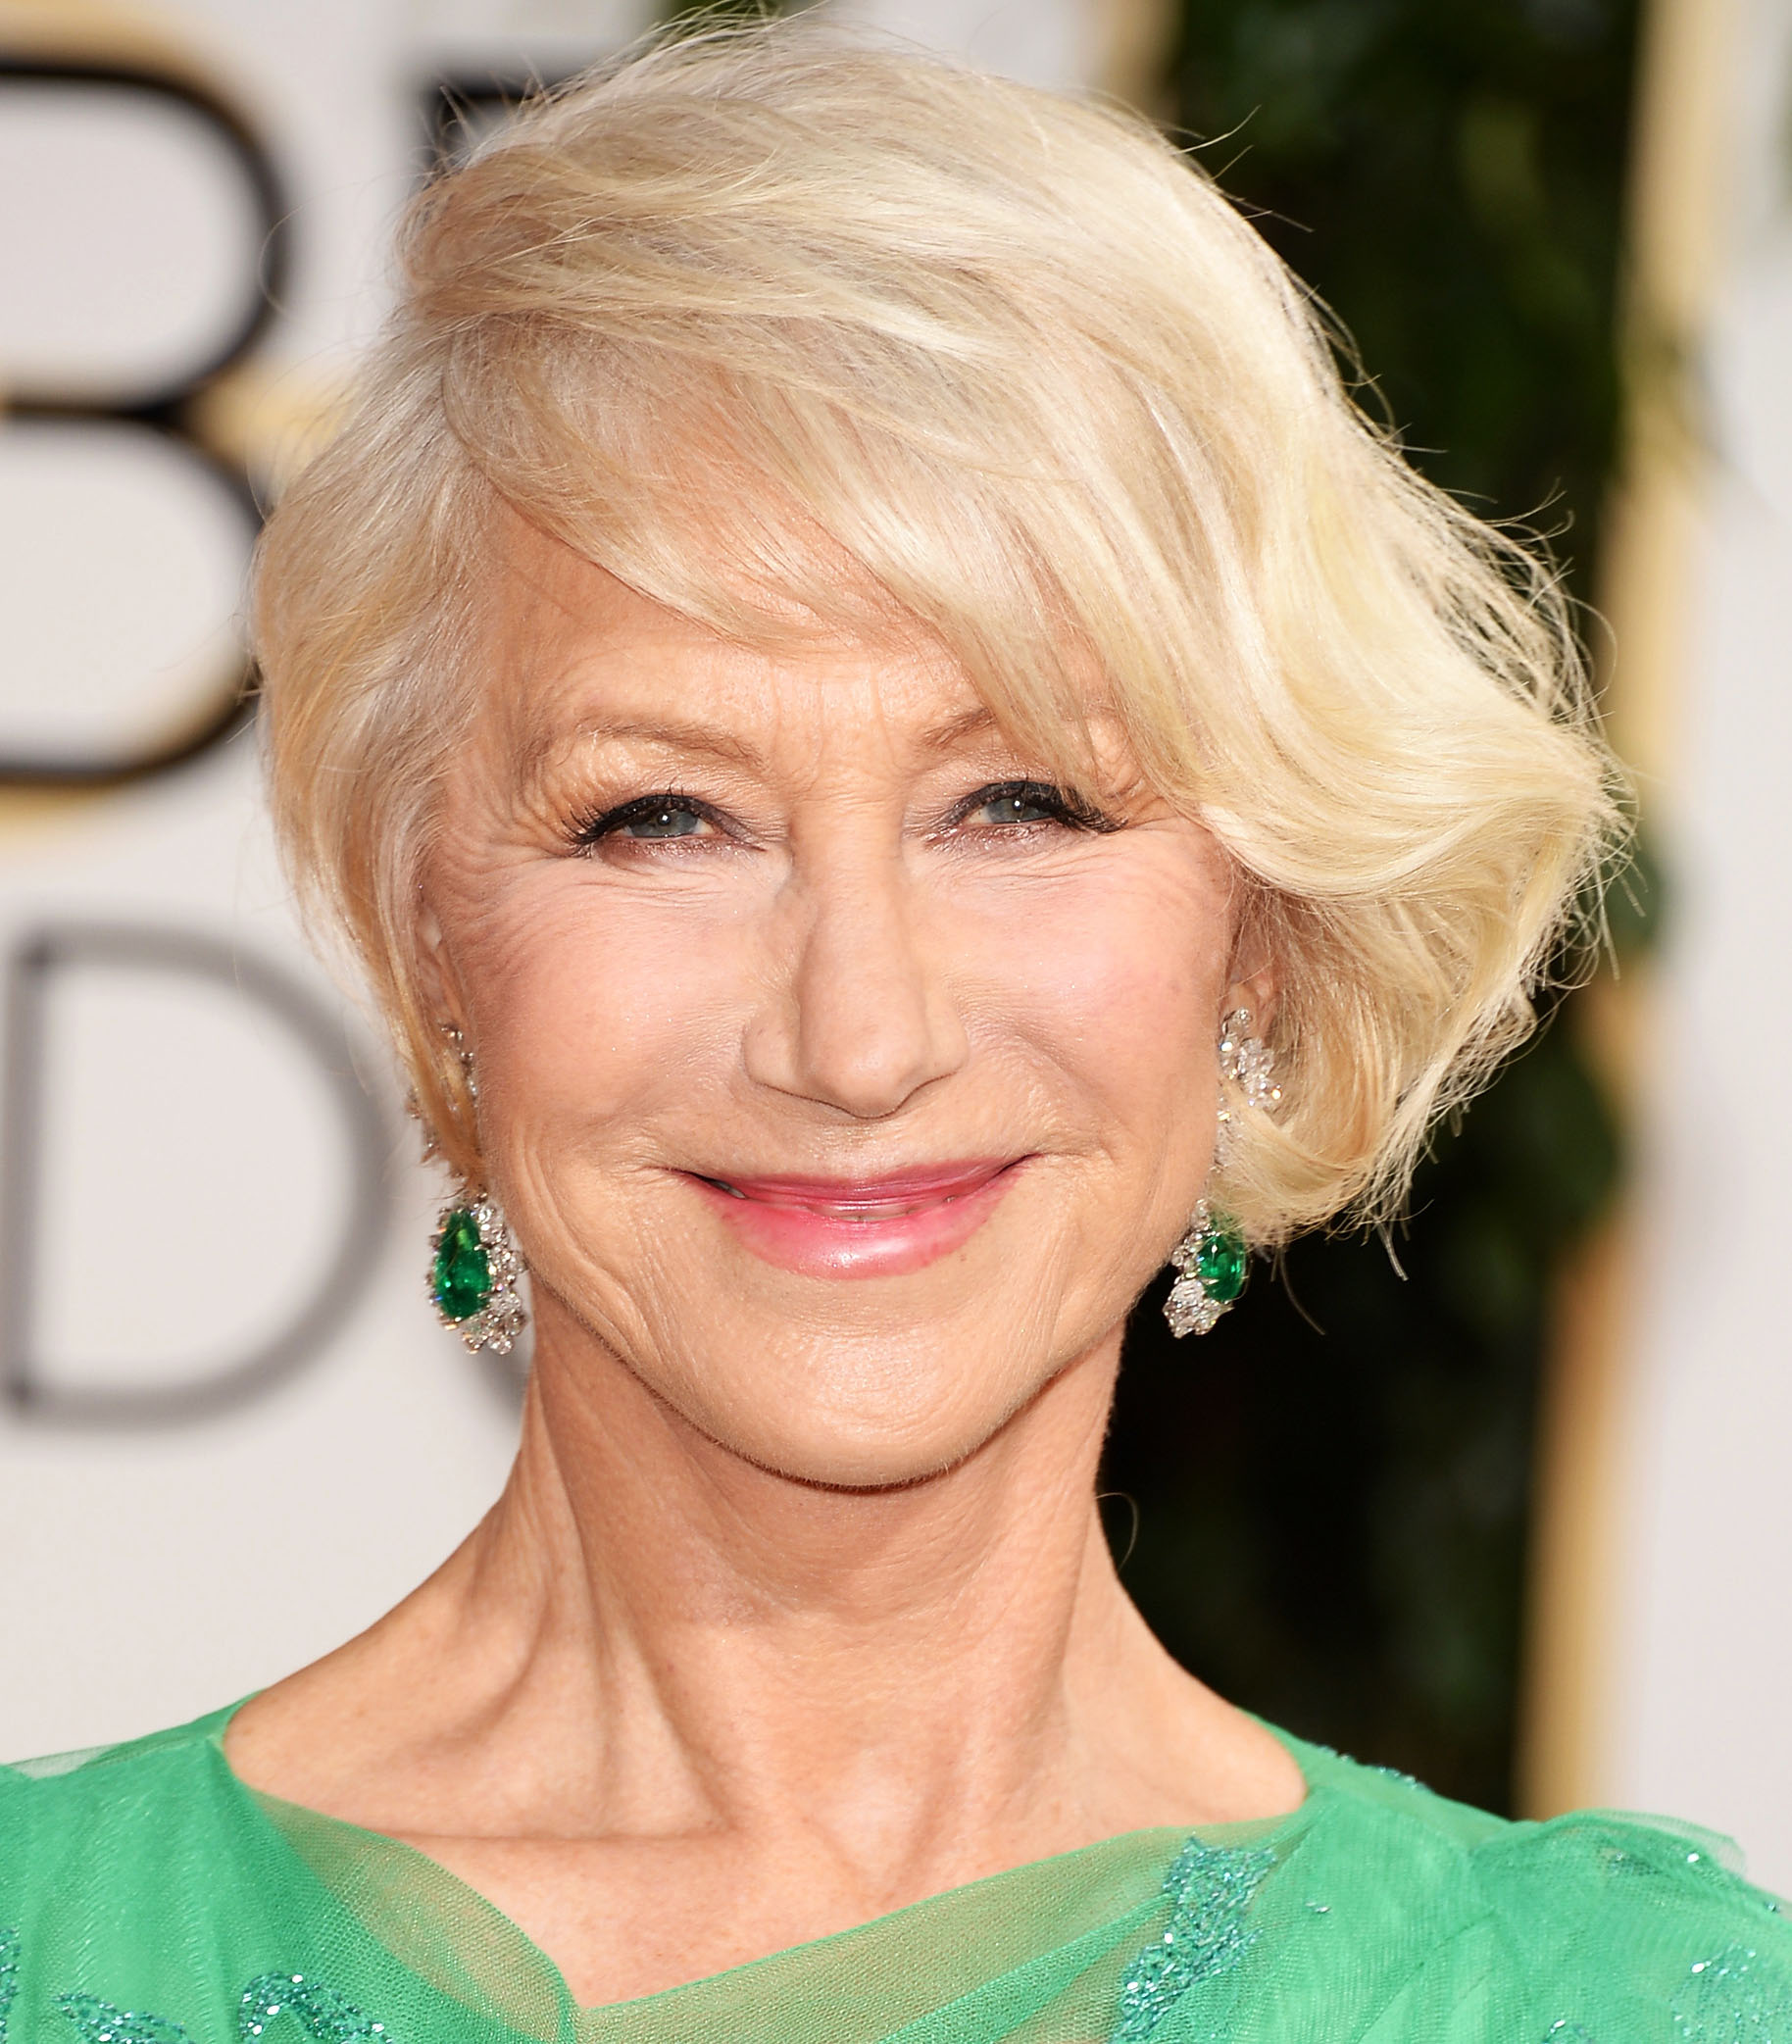 Helen Mirren Hopes to Thank the New Yorker Who Saved Her From a Subway ...